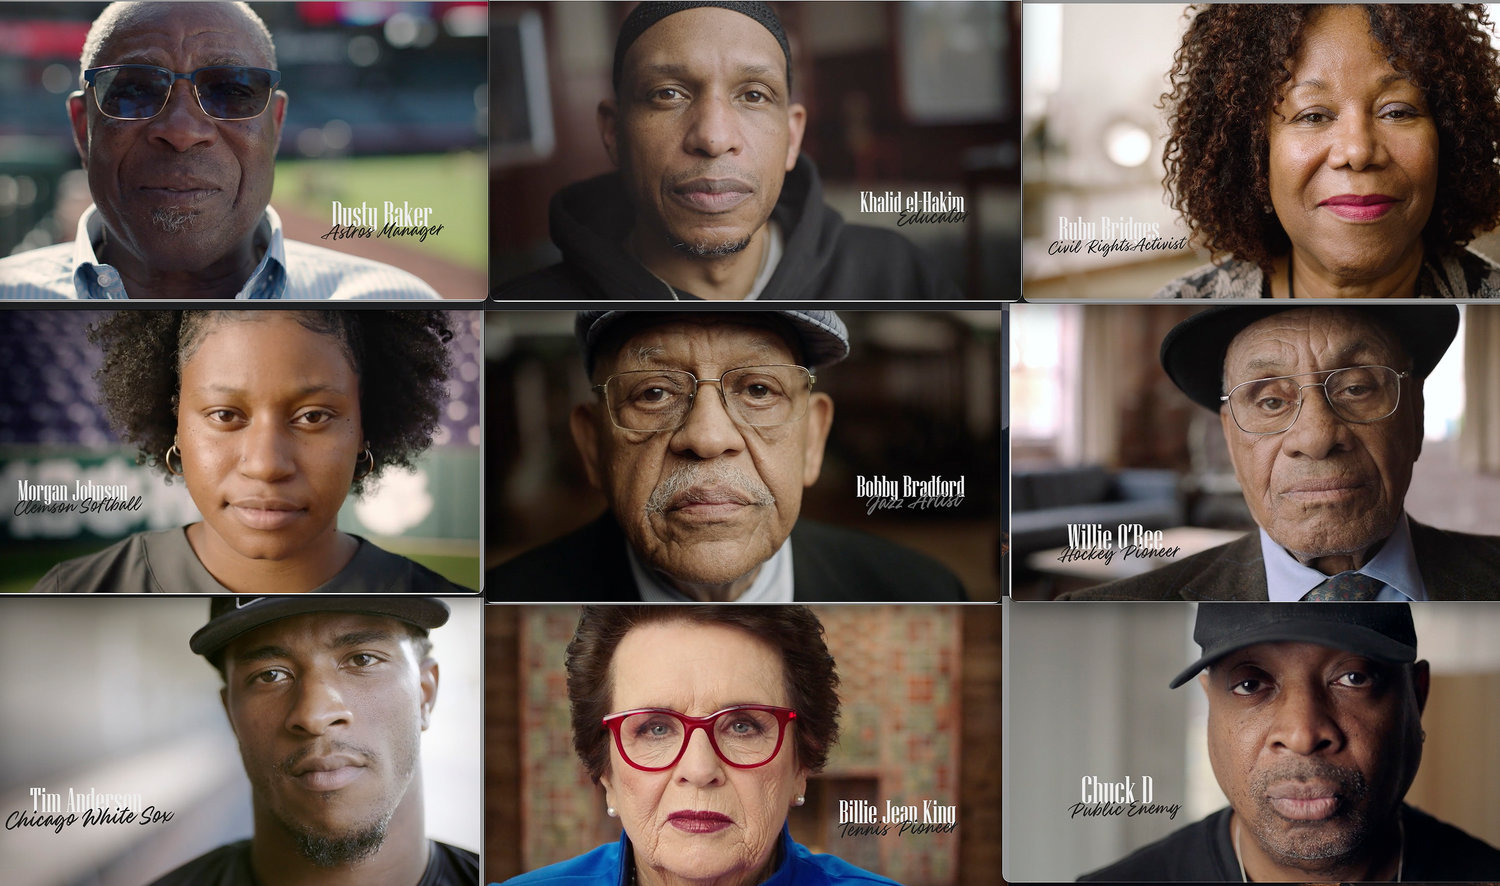 Nine of the dozen interviewees who took part in the ESPN mini-video series ‘Jackie to Me’ include Dusty Baker, Khalid el-Hakim, Ruby Bridges, Morgan Johnson, Bobby Bradford, Willie O’Ree, Tim Anderson, Billie Jean King, and Chuck D.